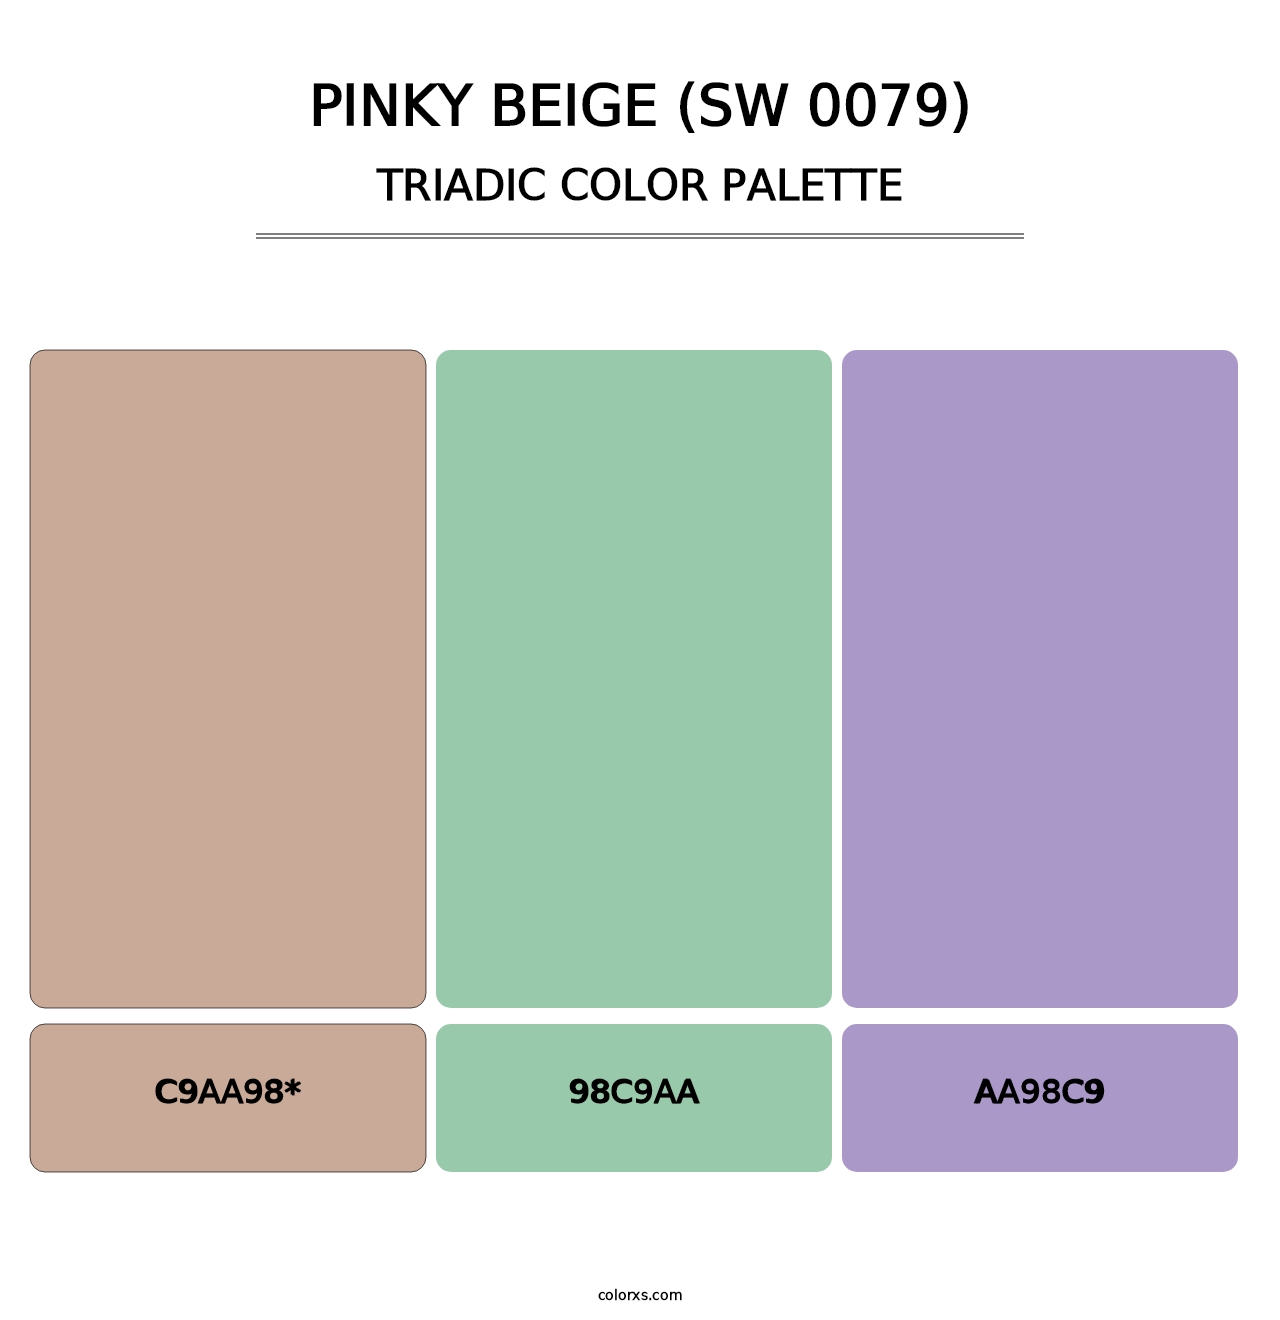 Pinky Beige (SW 0079) - Triadic Color Palette